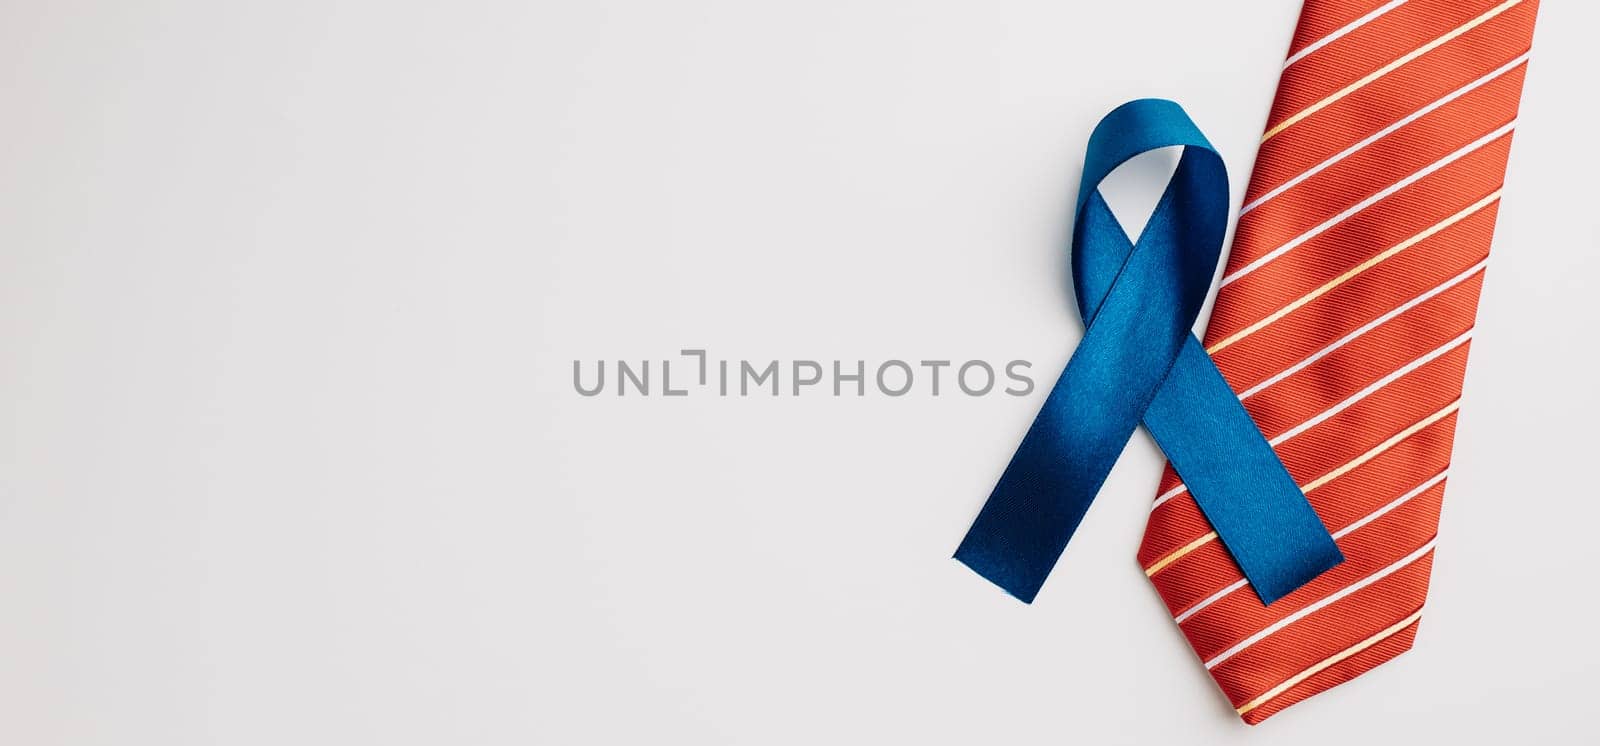 November and September, a blue ribbon takes a prominent position by Sorapop